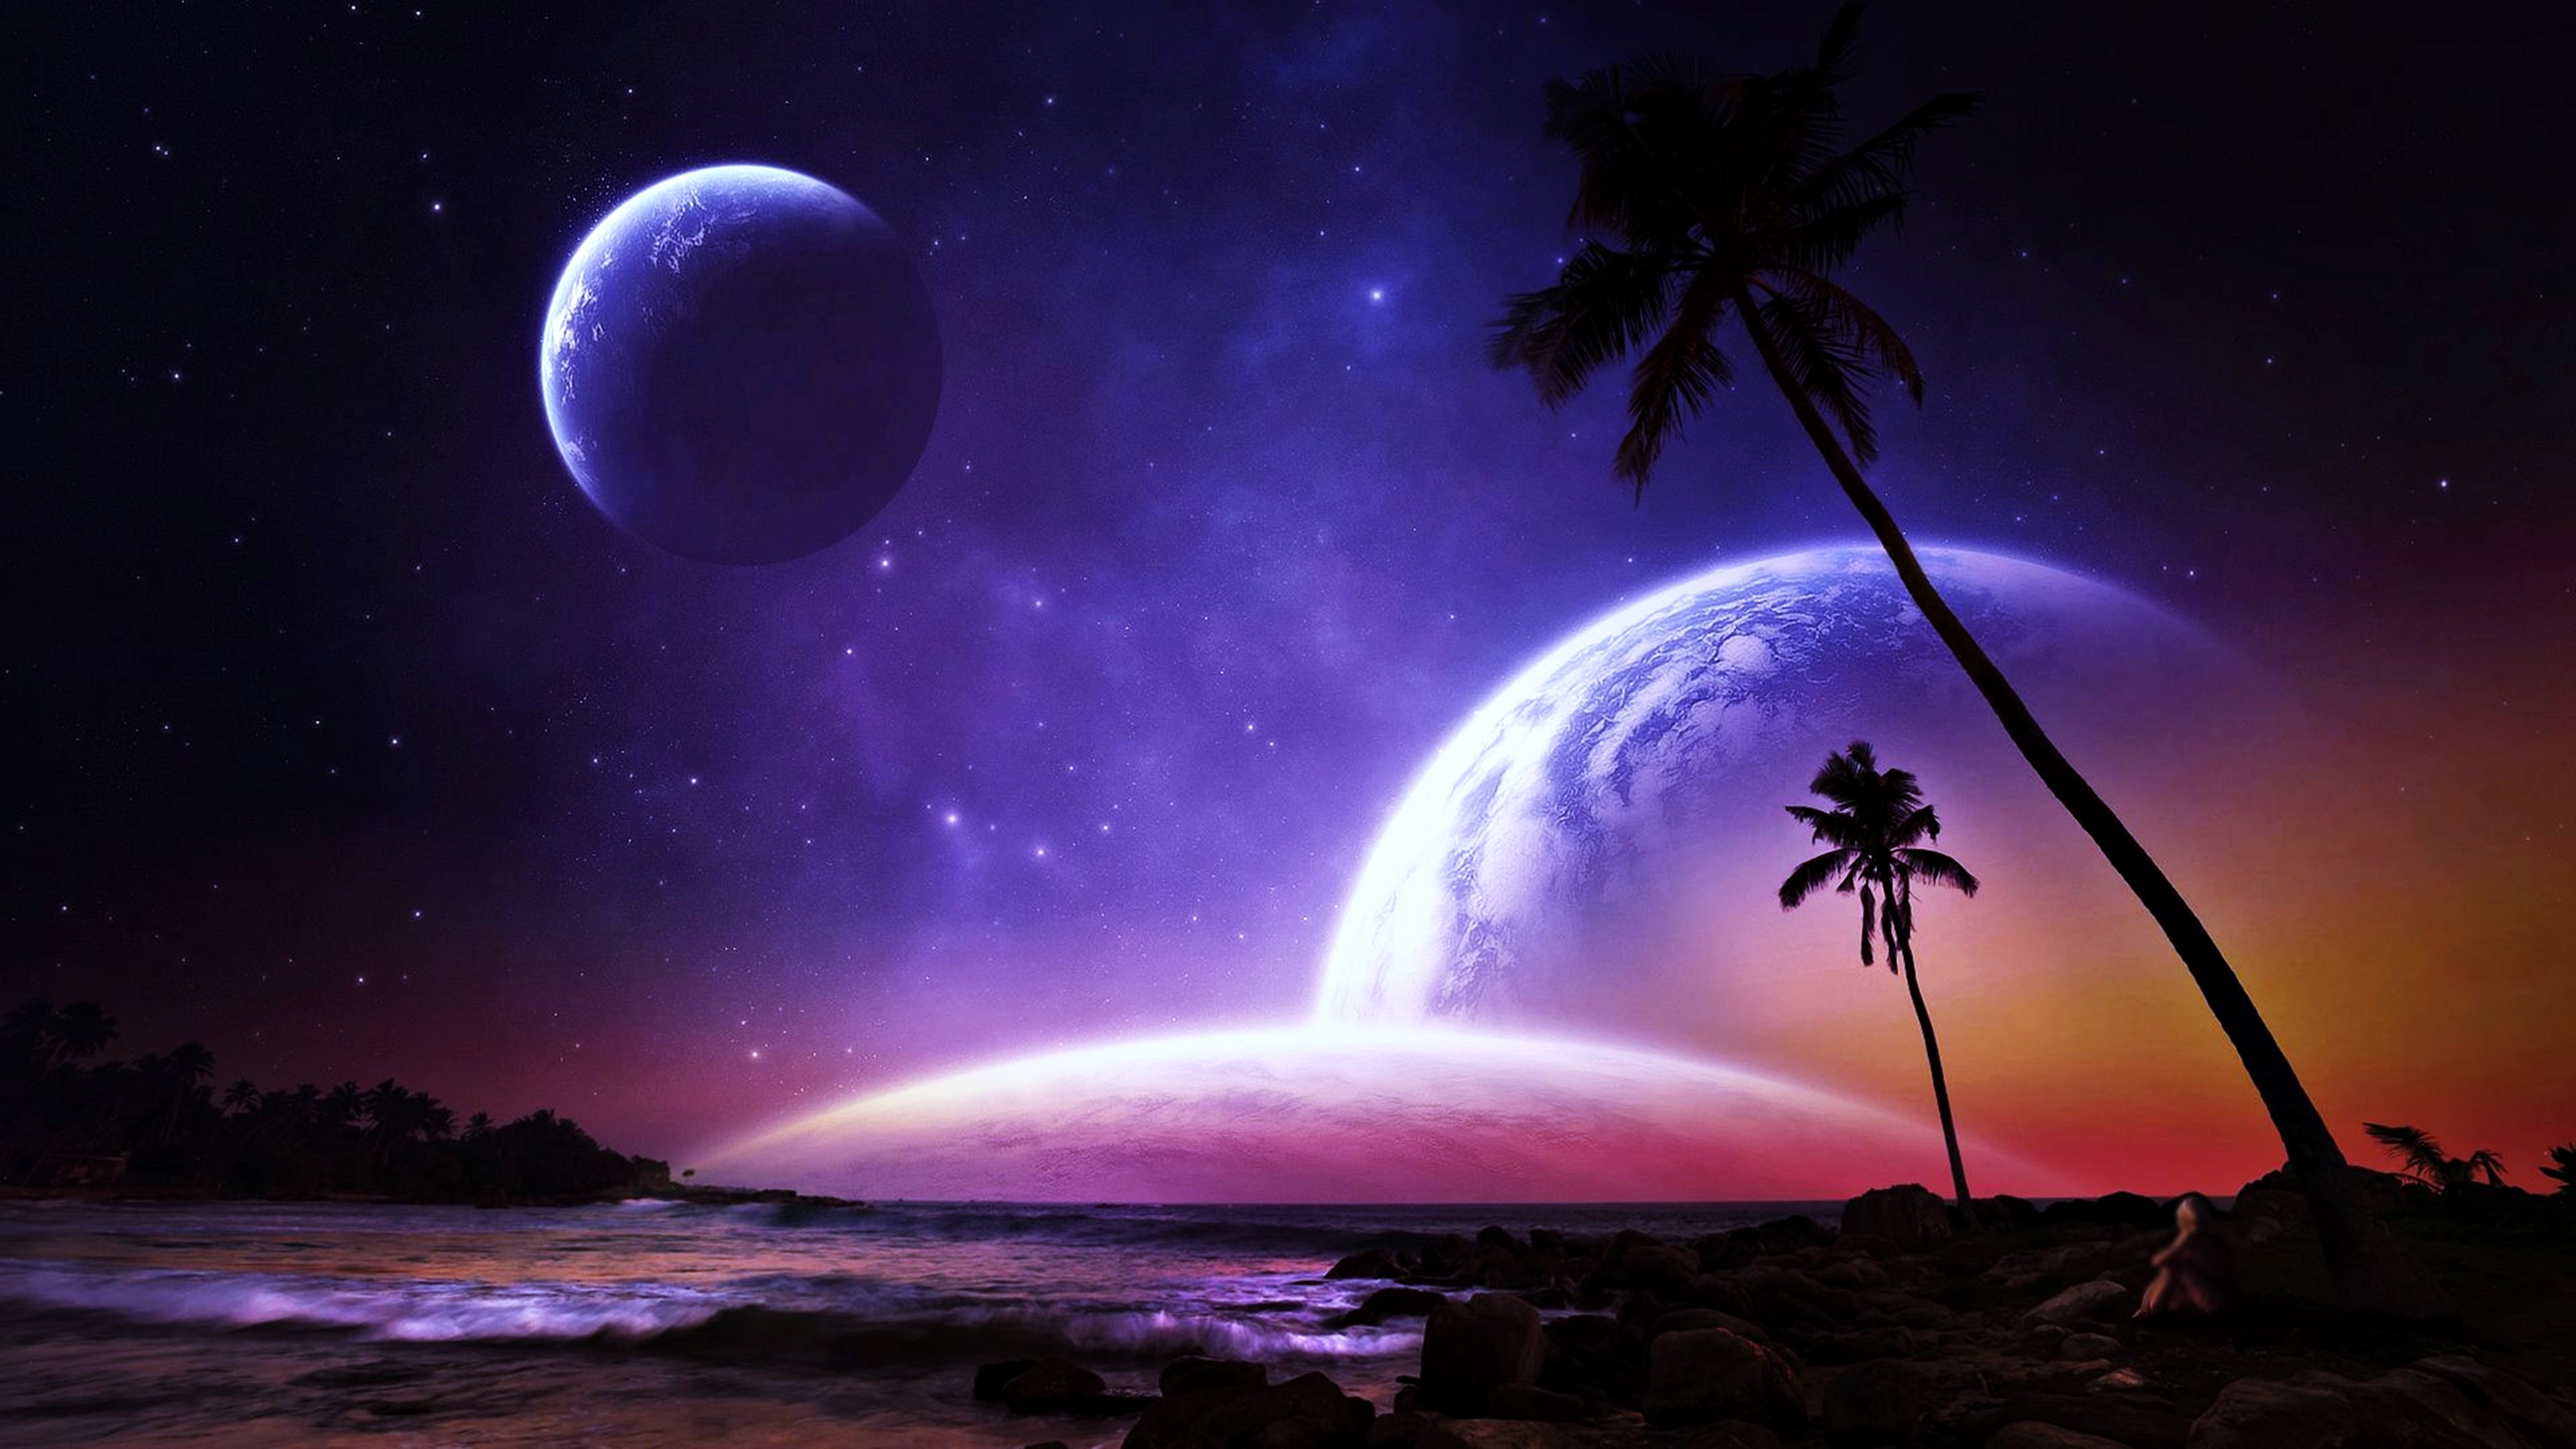 planets, Palms, Fantasy, Dreams, Colorful, Beaches, Space, Stars, Galaxy, Worlds, Earth Wallpaper